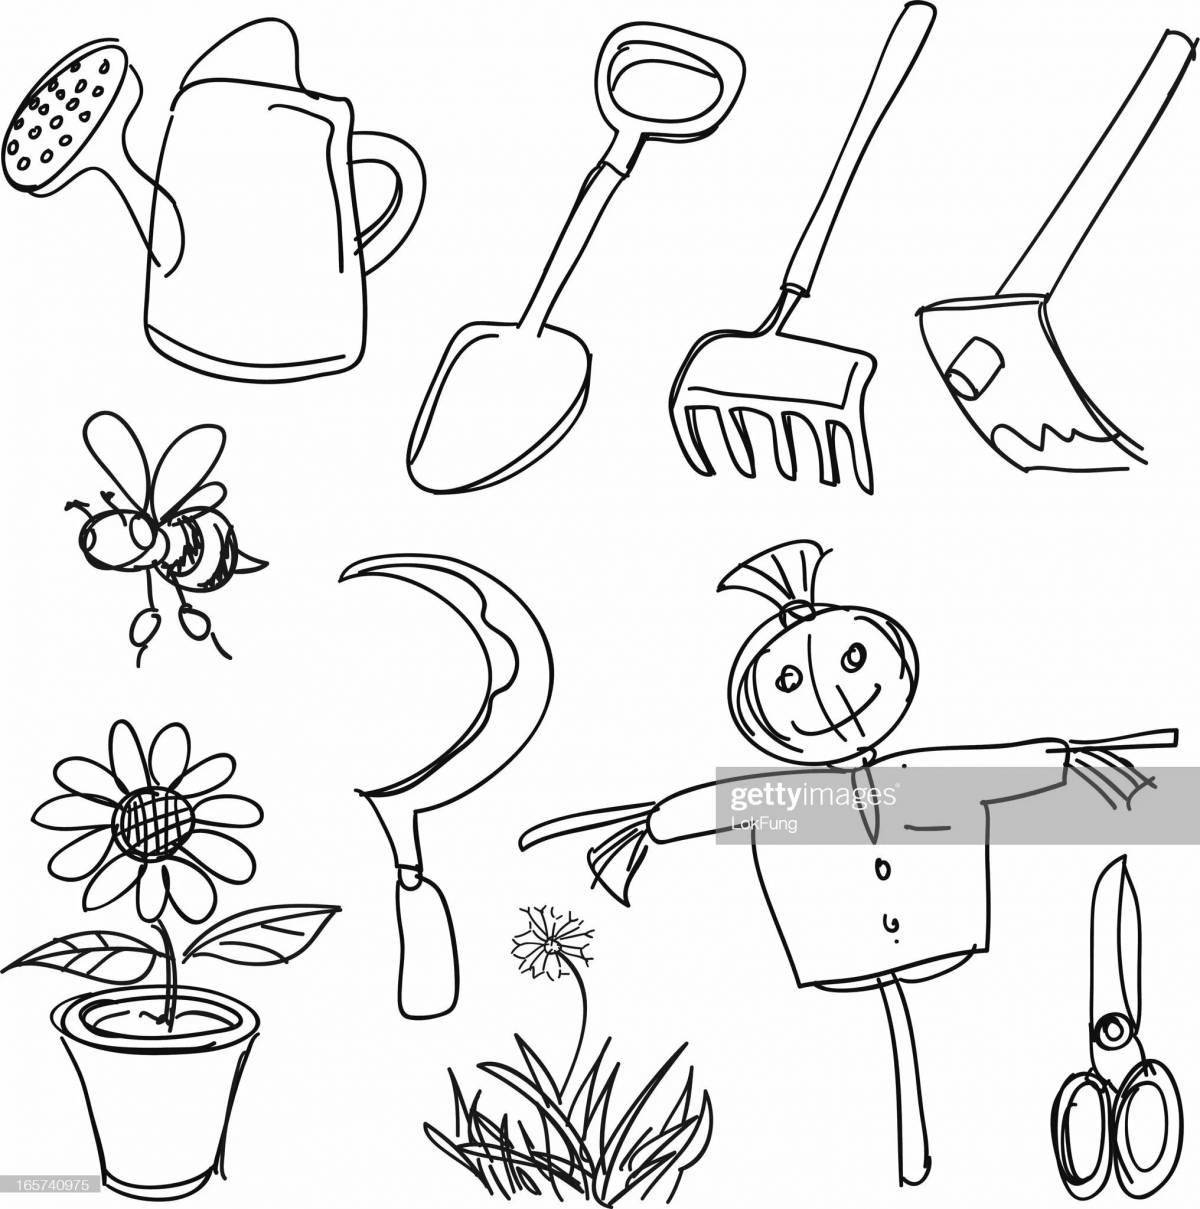 Interactive coloring pages for children 6-7 years old